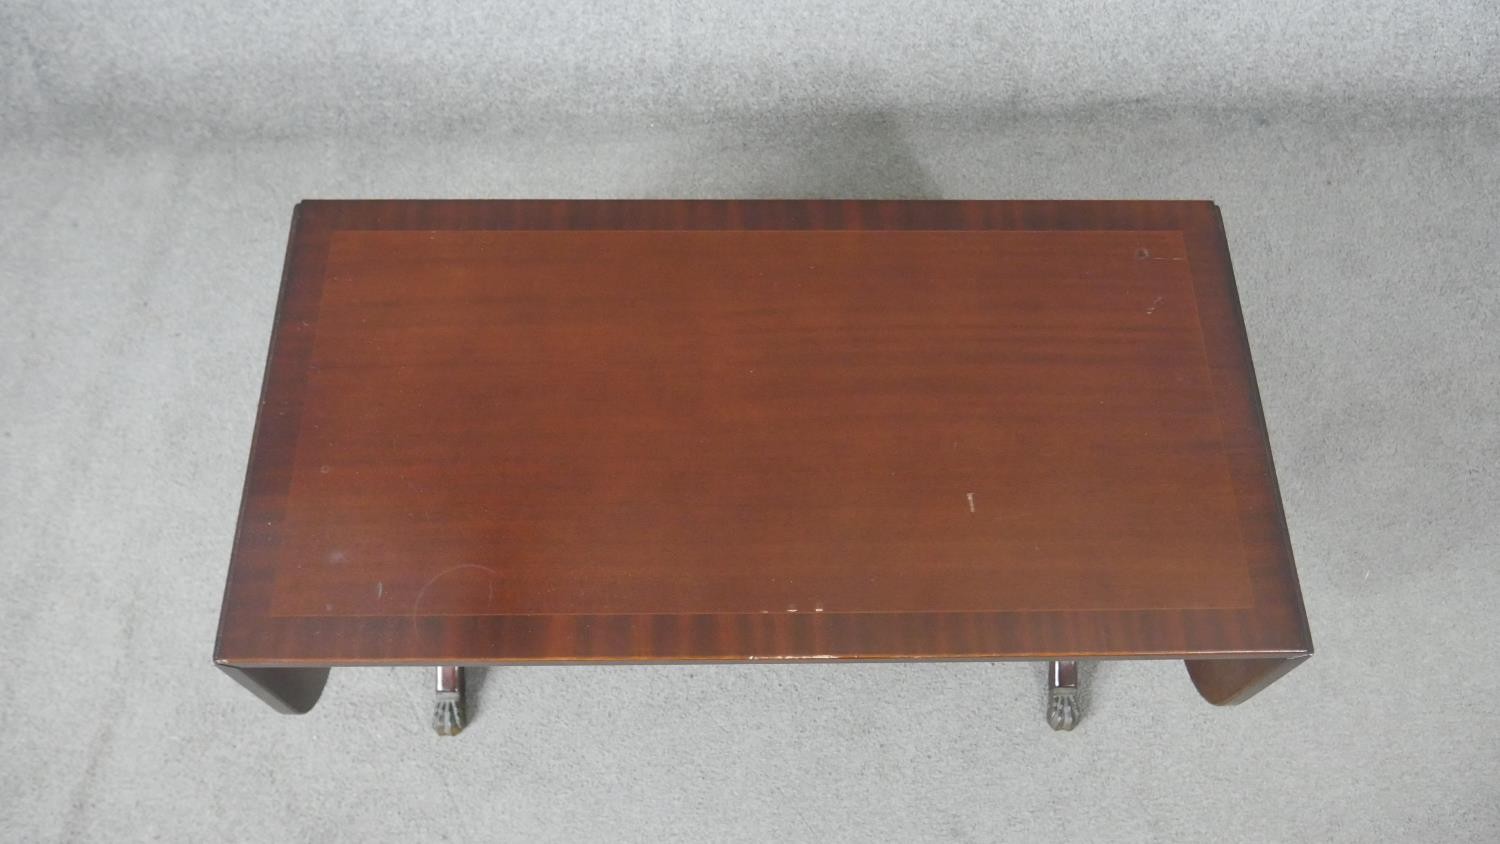 A 20th century George III style mahogany coffee table, the crossbanded top with two drop leaves, - Image 2 of 9